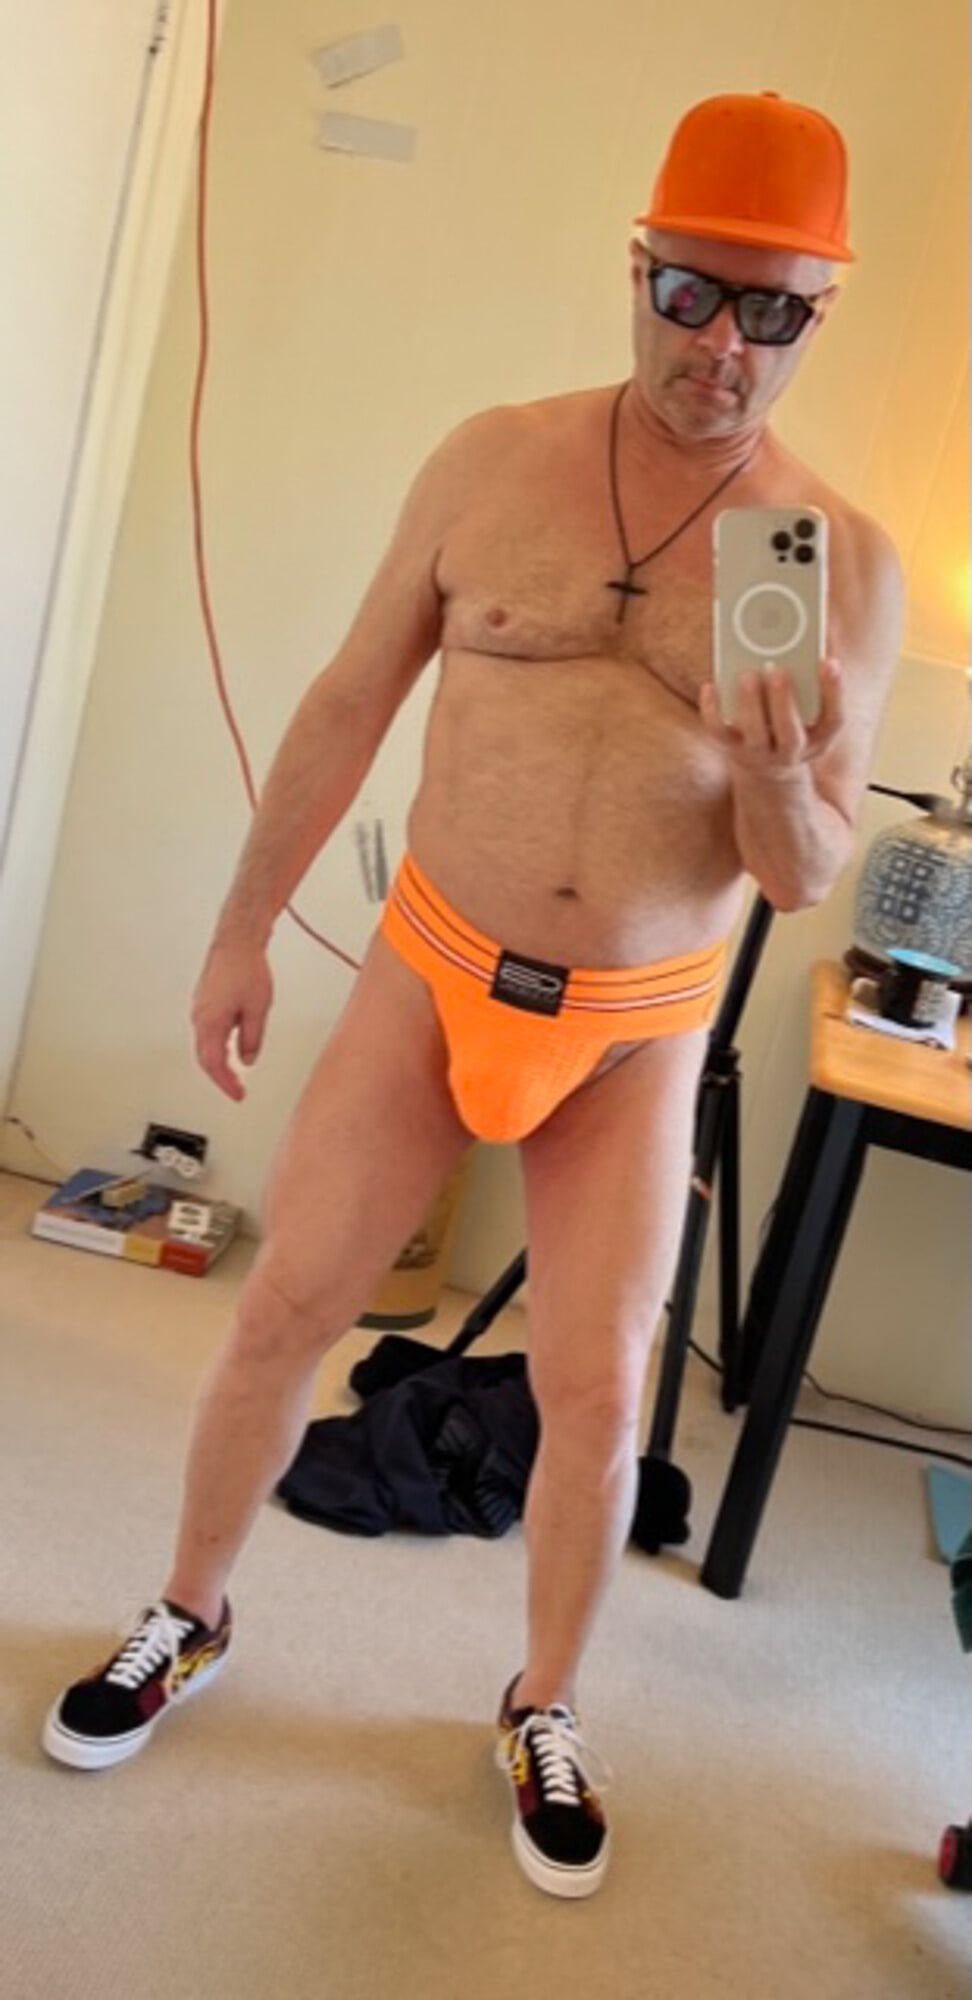 Orange Jock and Cap and, of course, the Prize!